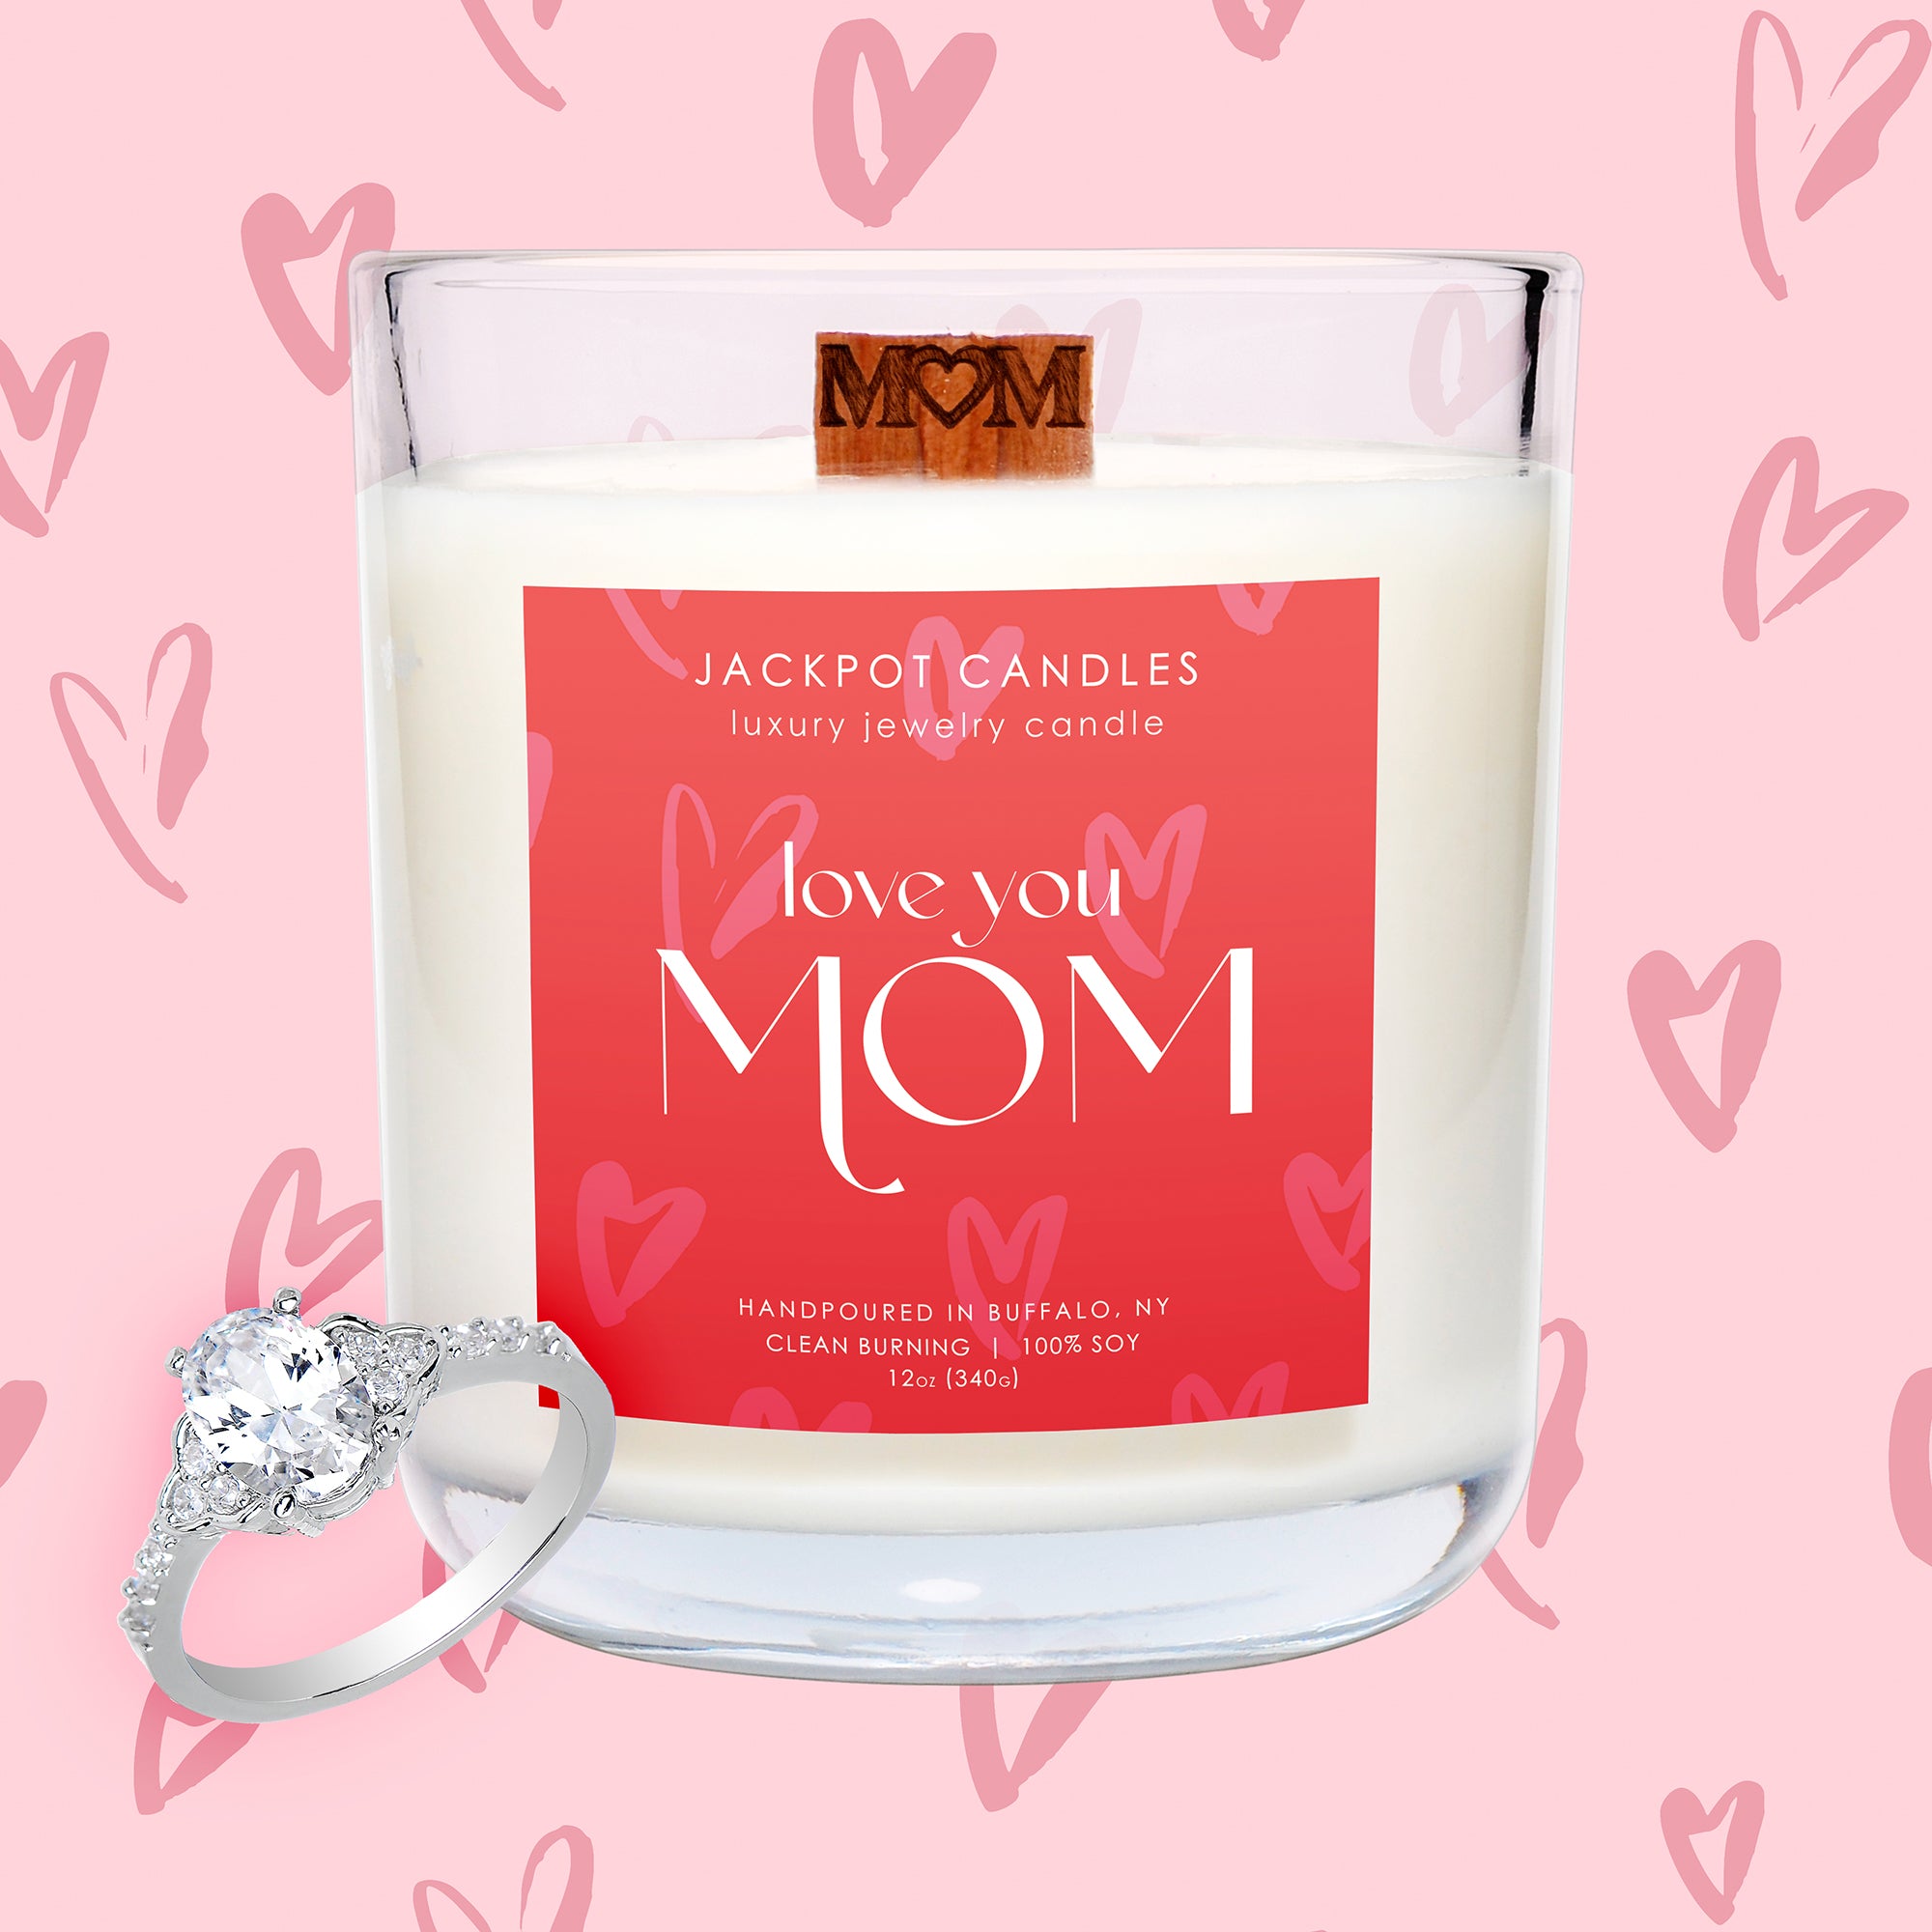 Happy Mother's Day  MOTHERS DAY CASH MONEY CANDLES (heart)